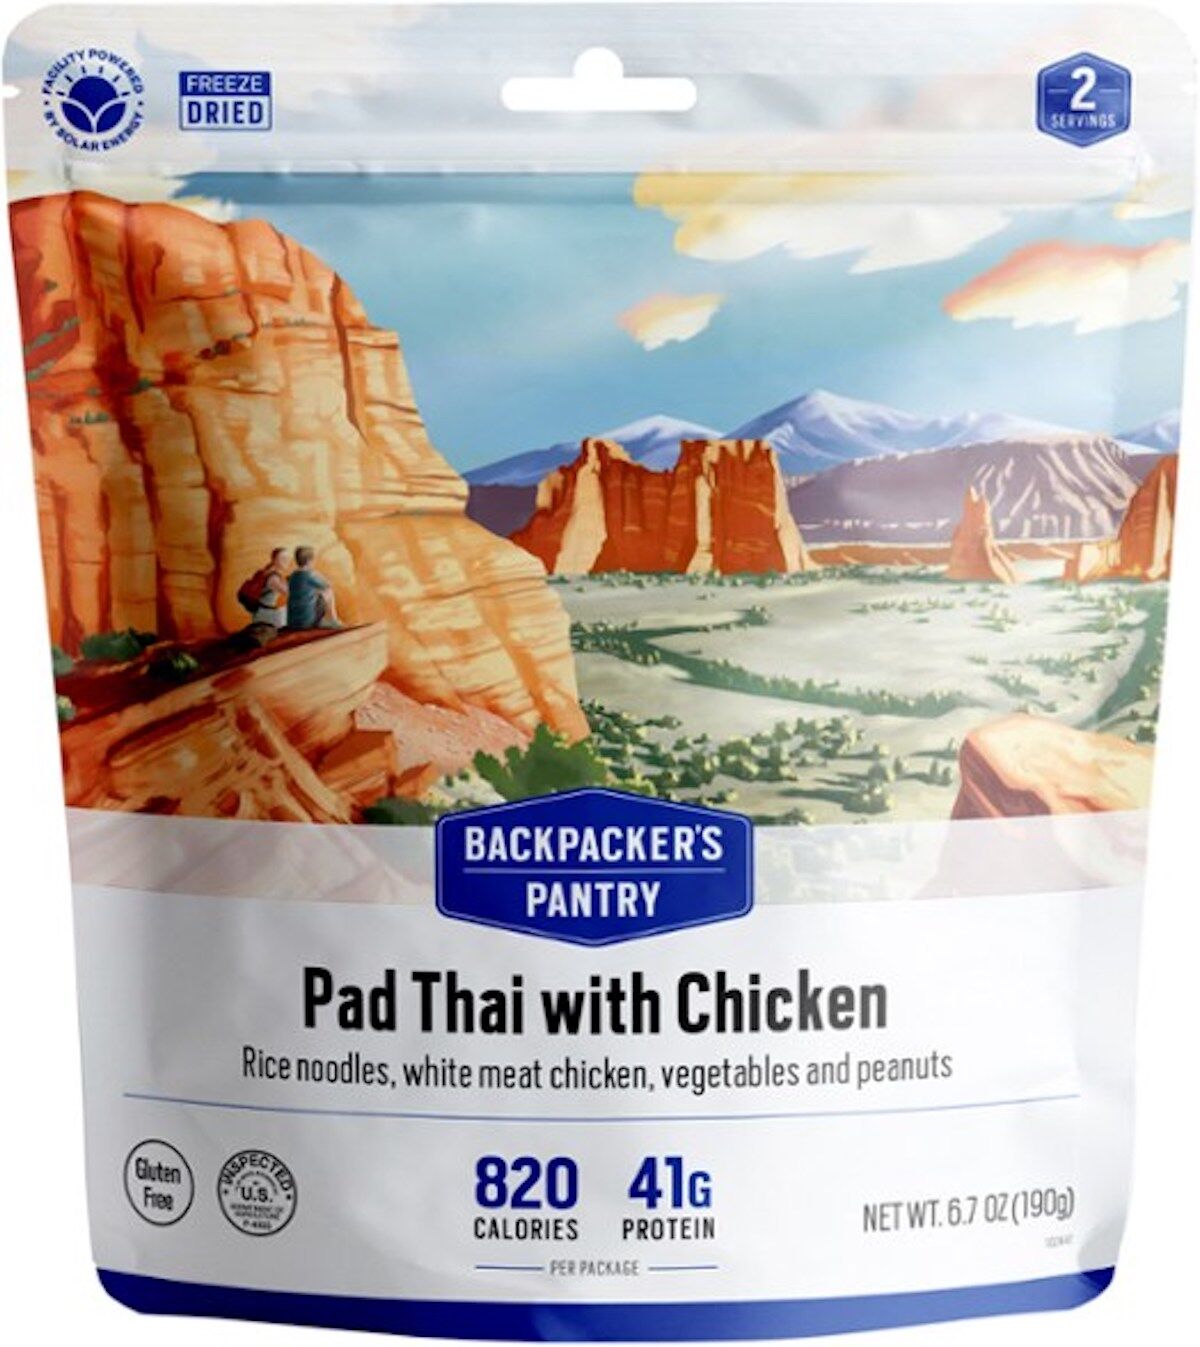 Backpacker's Pantry Pad Thai has an image of two people hiking on a mountain on the label